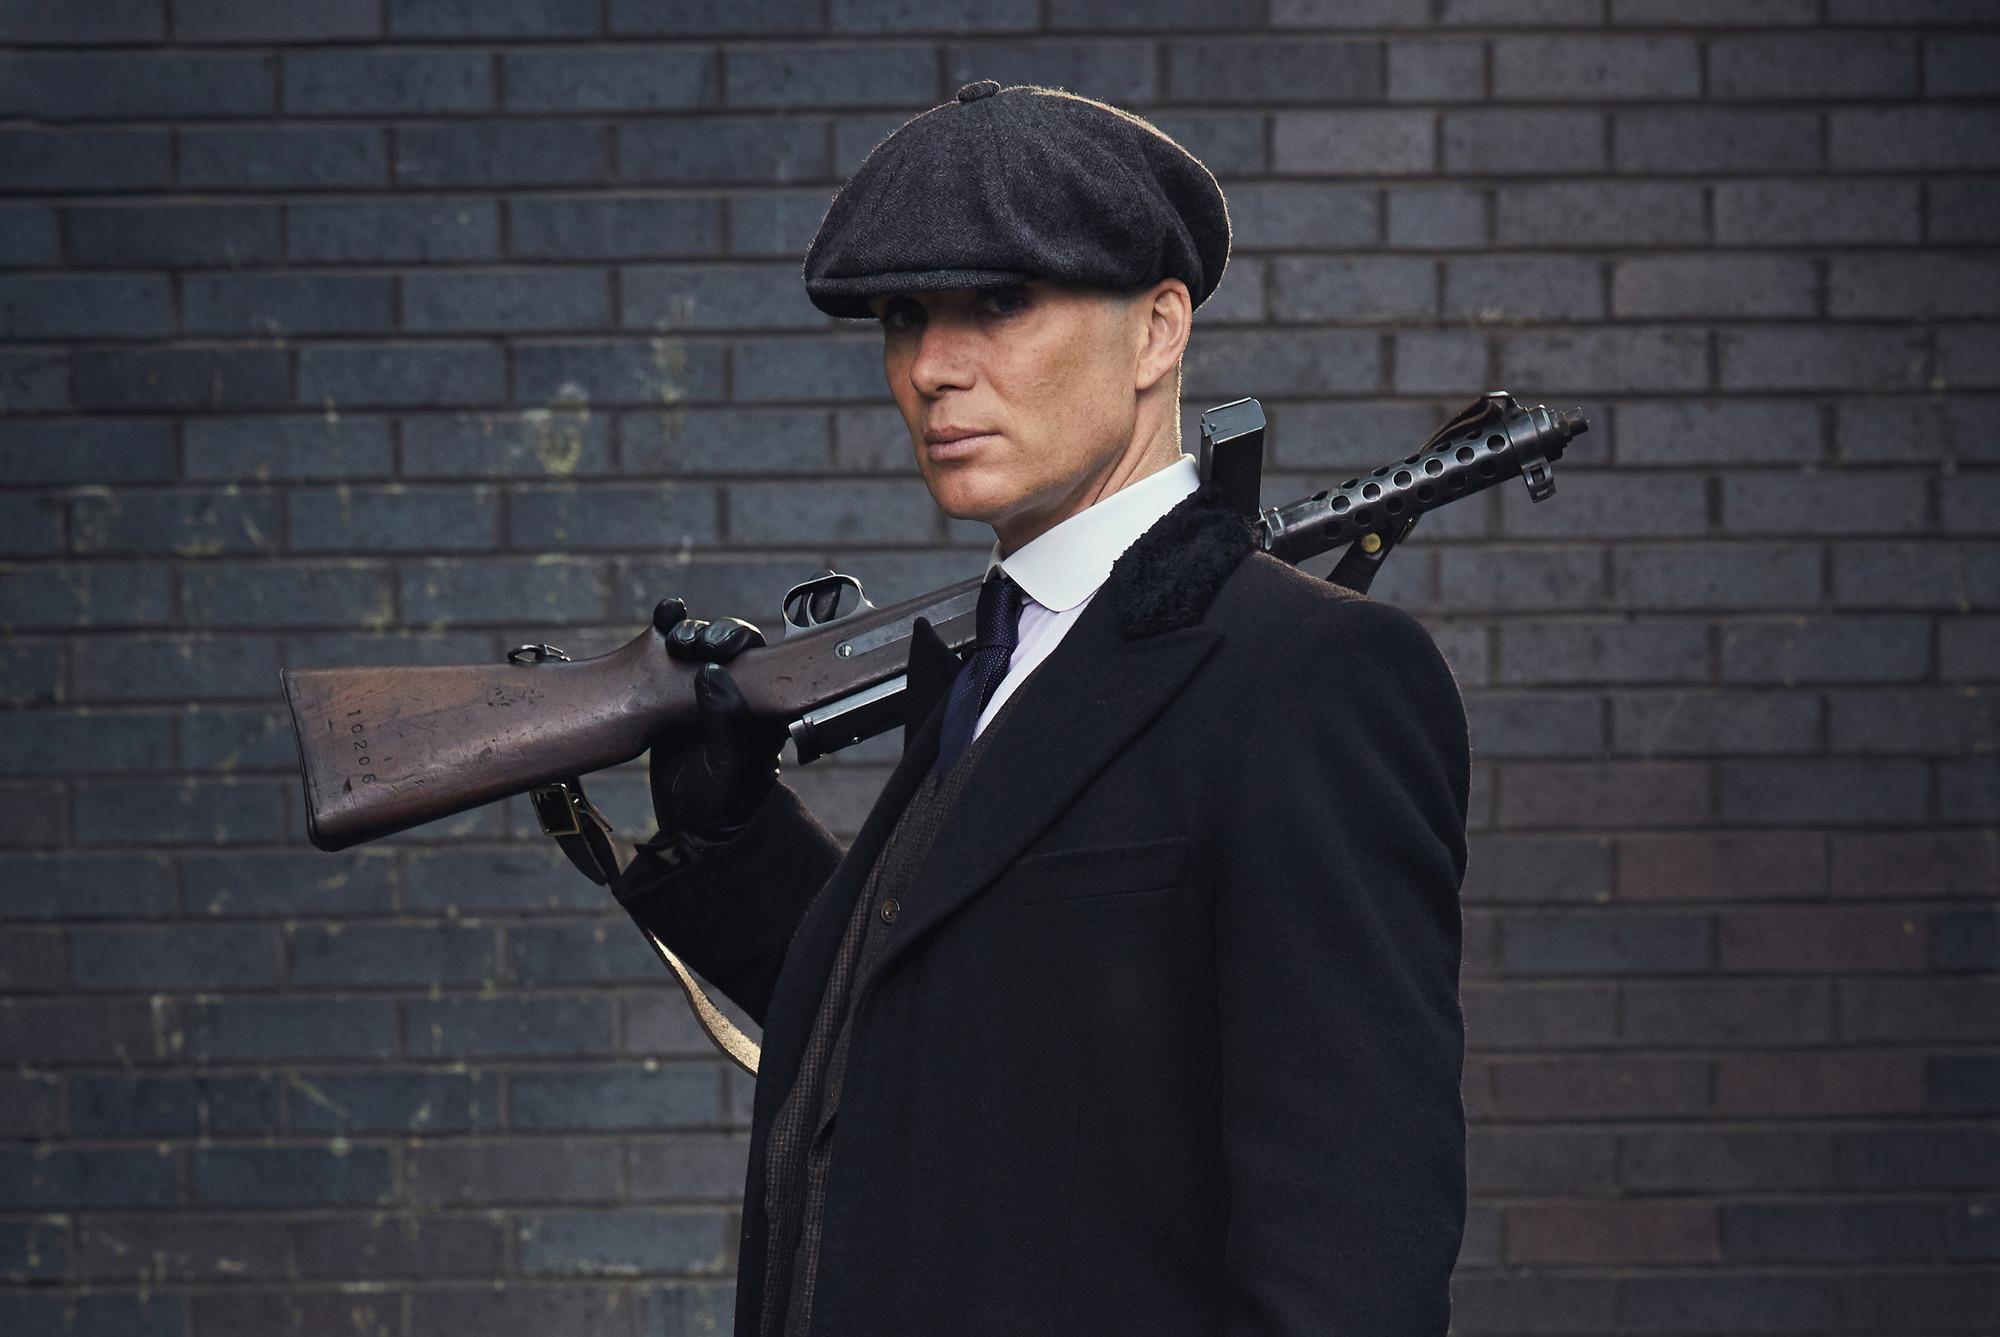 A Peaky Blinders festival is coming to the UK. London Evening Standard